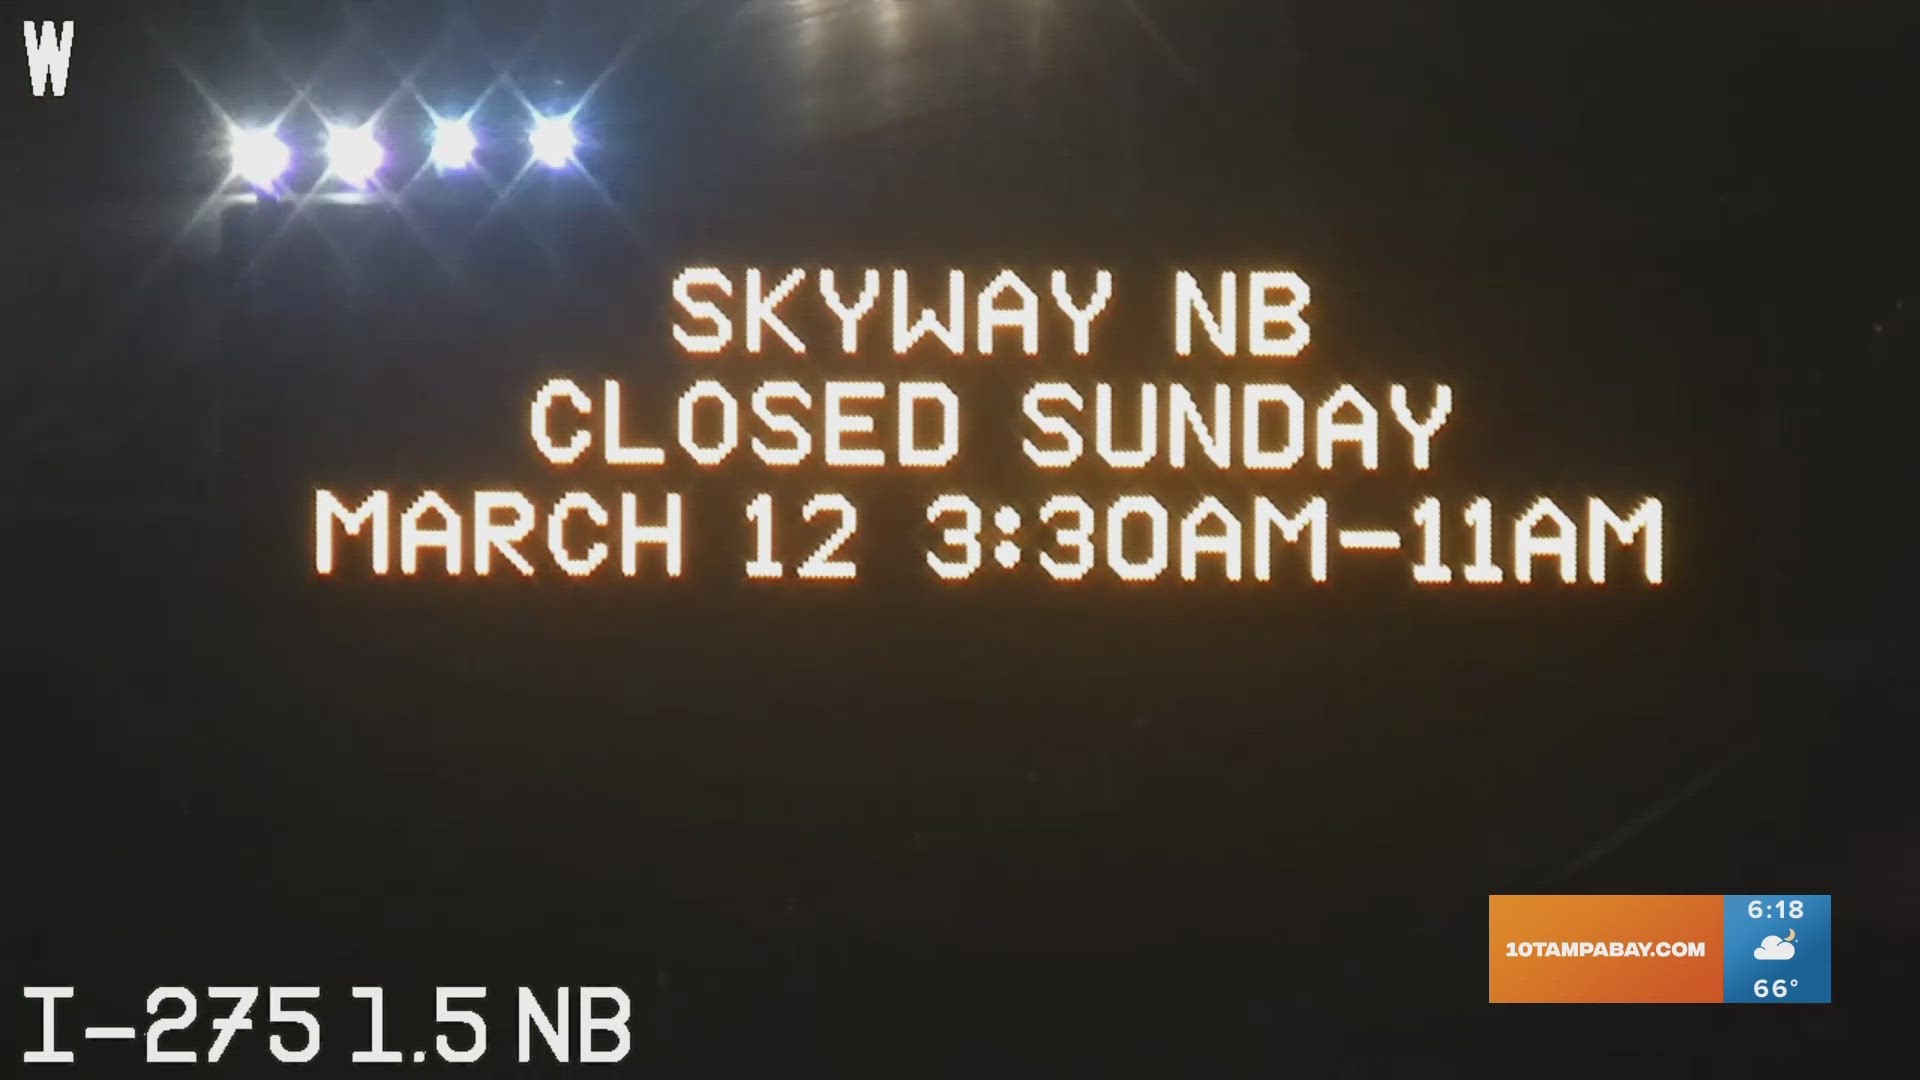 It's because about 8,000 runners and walkers will participate in the Skyway 10K, which includes a span of the Sunshine Skyway Bridge.